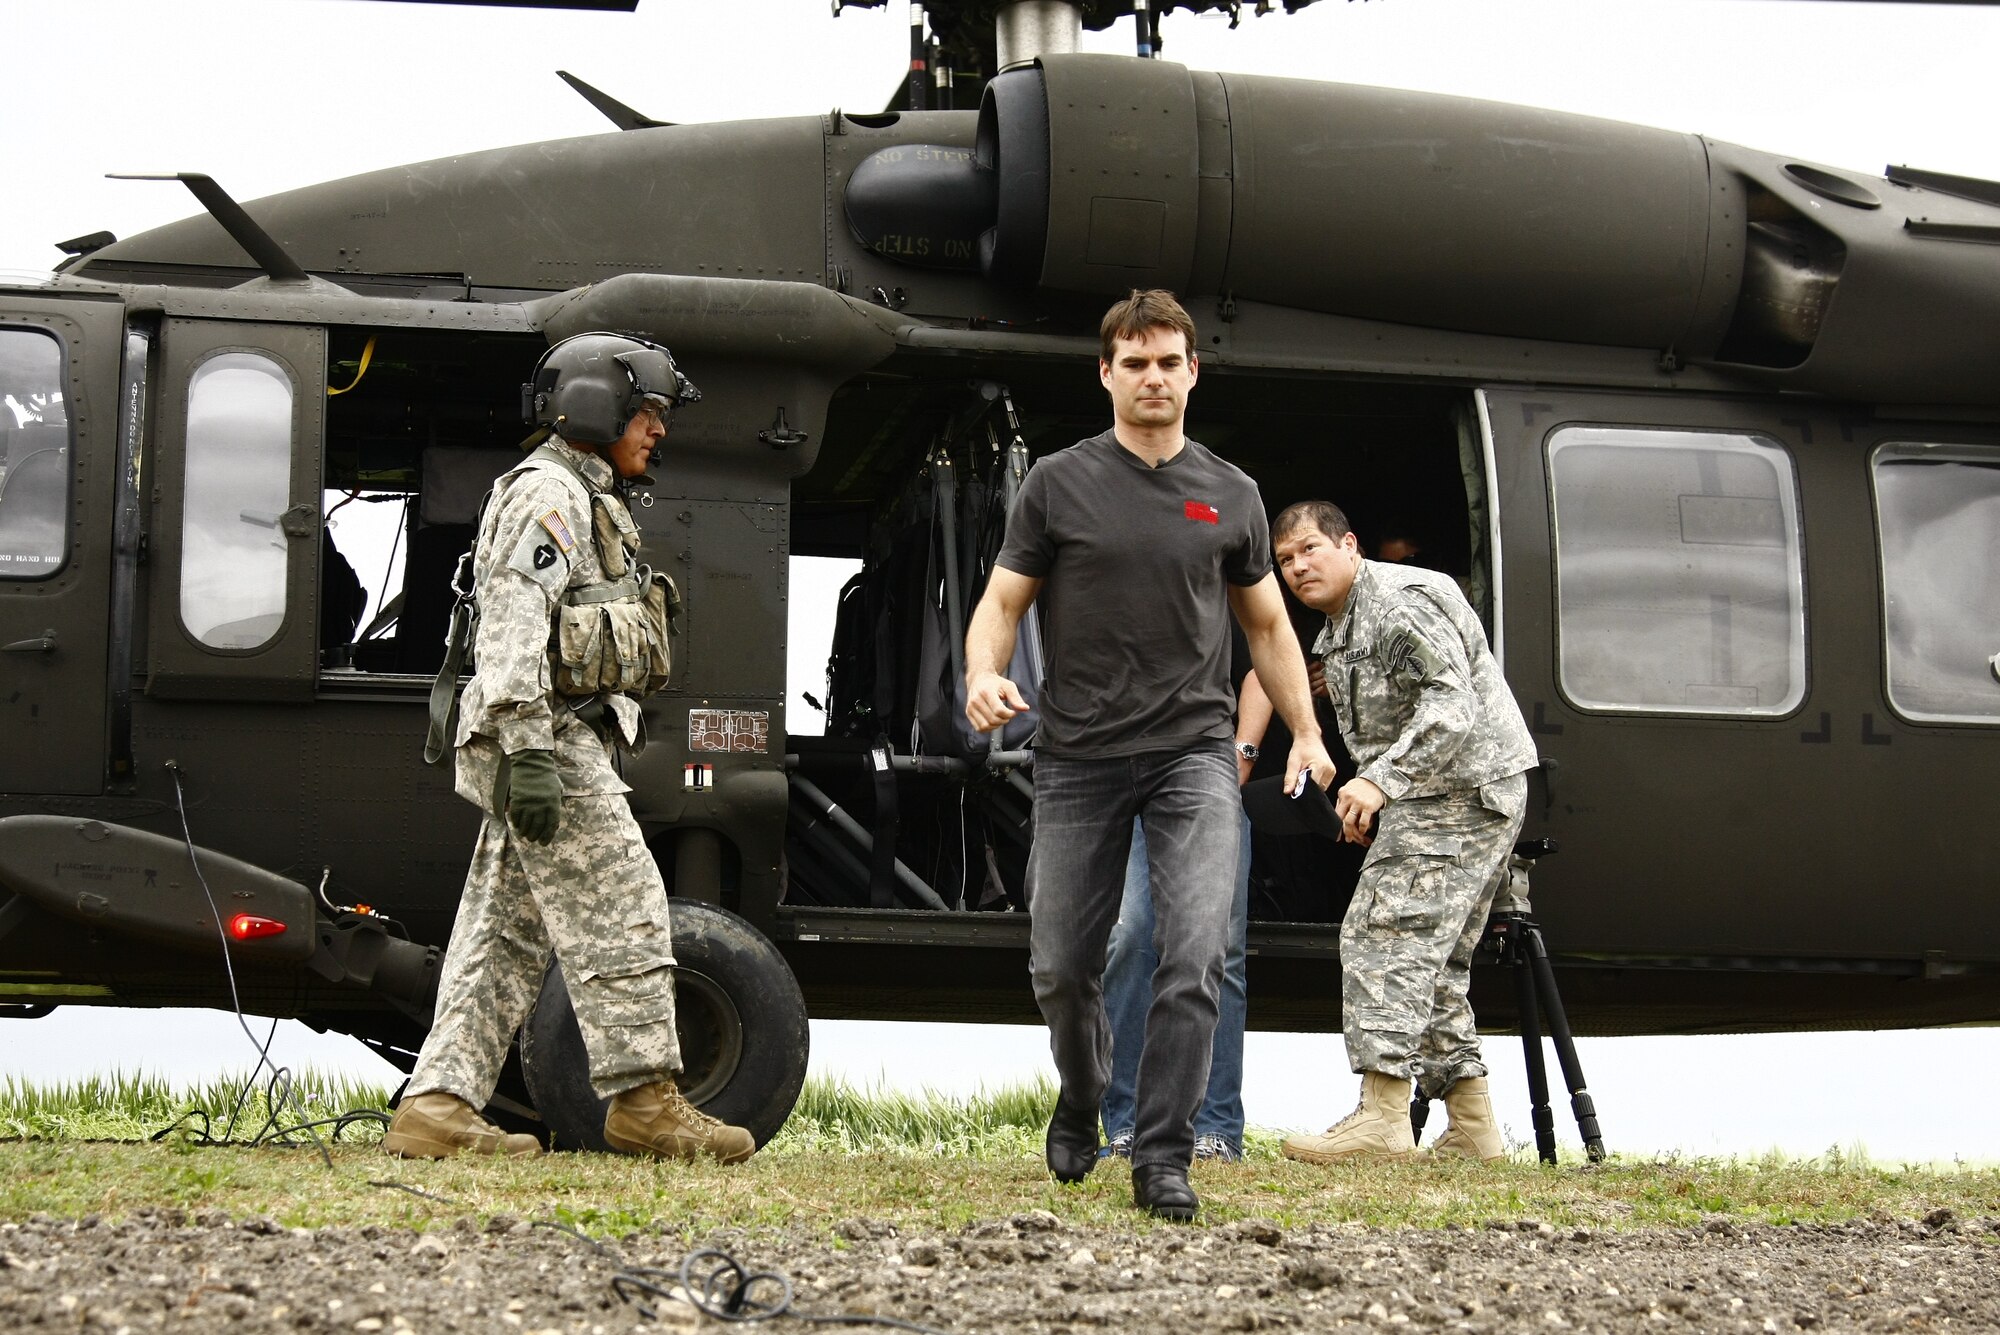 NASCAR driver Jeff Gordon disembarks from a UH-60 Black Hawk helicopter as he arrives at the Advanced Law Enforcement Rapid Response Training (ALERRT) facility to suit up with National Guard Special Forces Soldiers, in Texas, on April 15, 2010. (U.S. Air Force photo by Senior Master Sgt. Mike Arellano/Released)